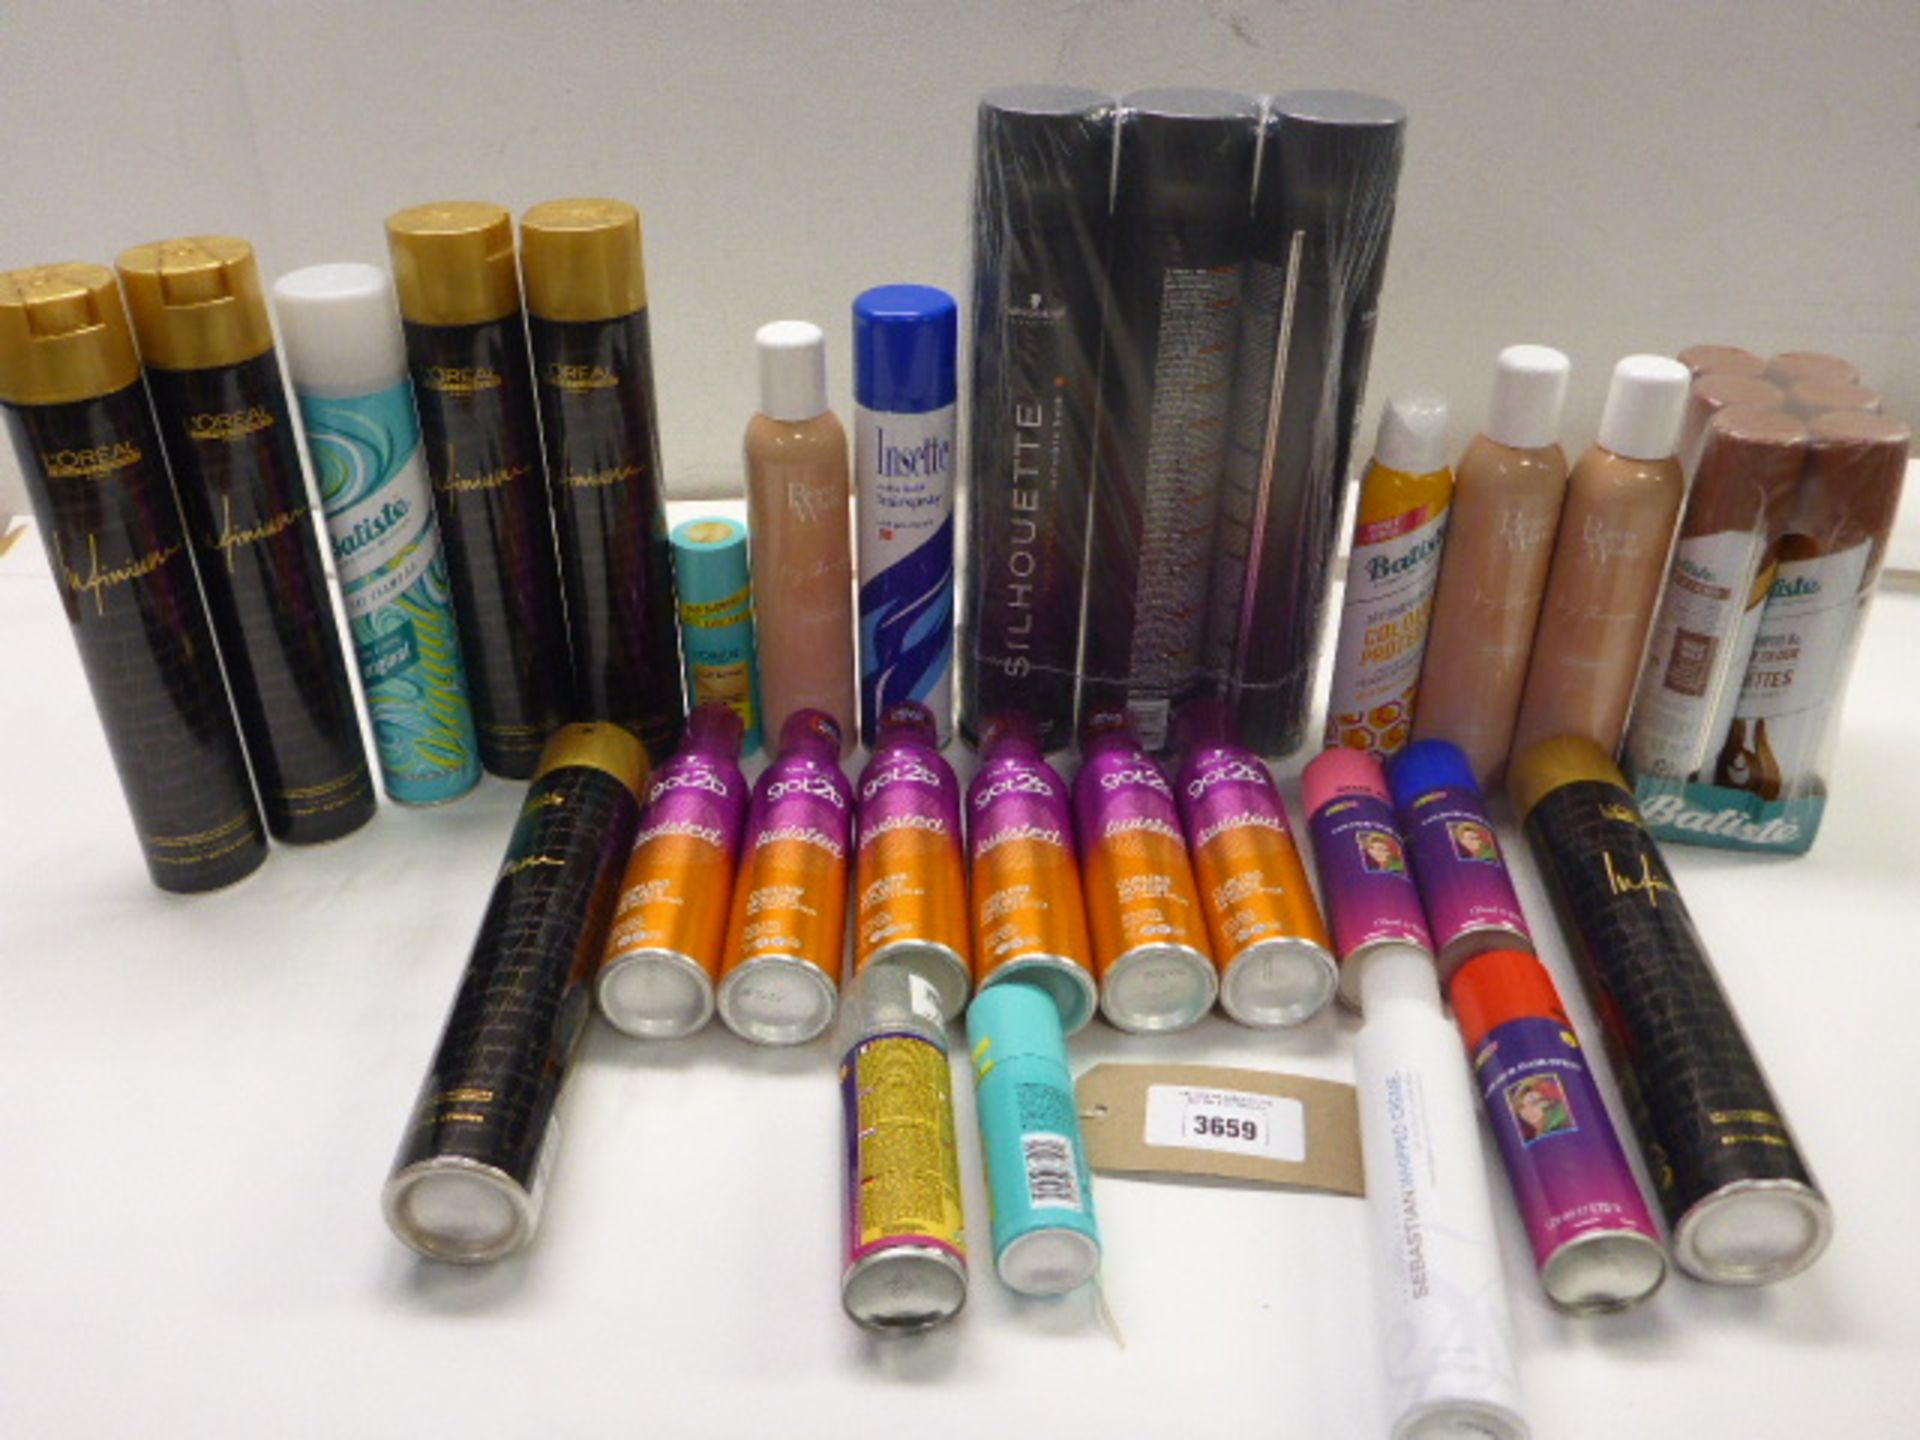 Selection of hair products including hair sprays, styling mousse, dry shampoo etc